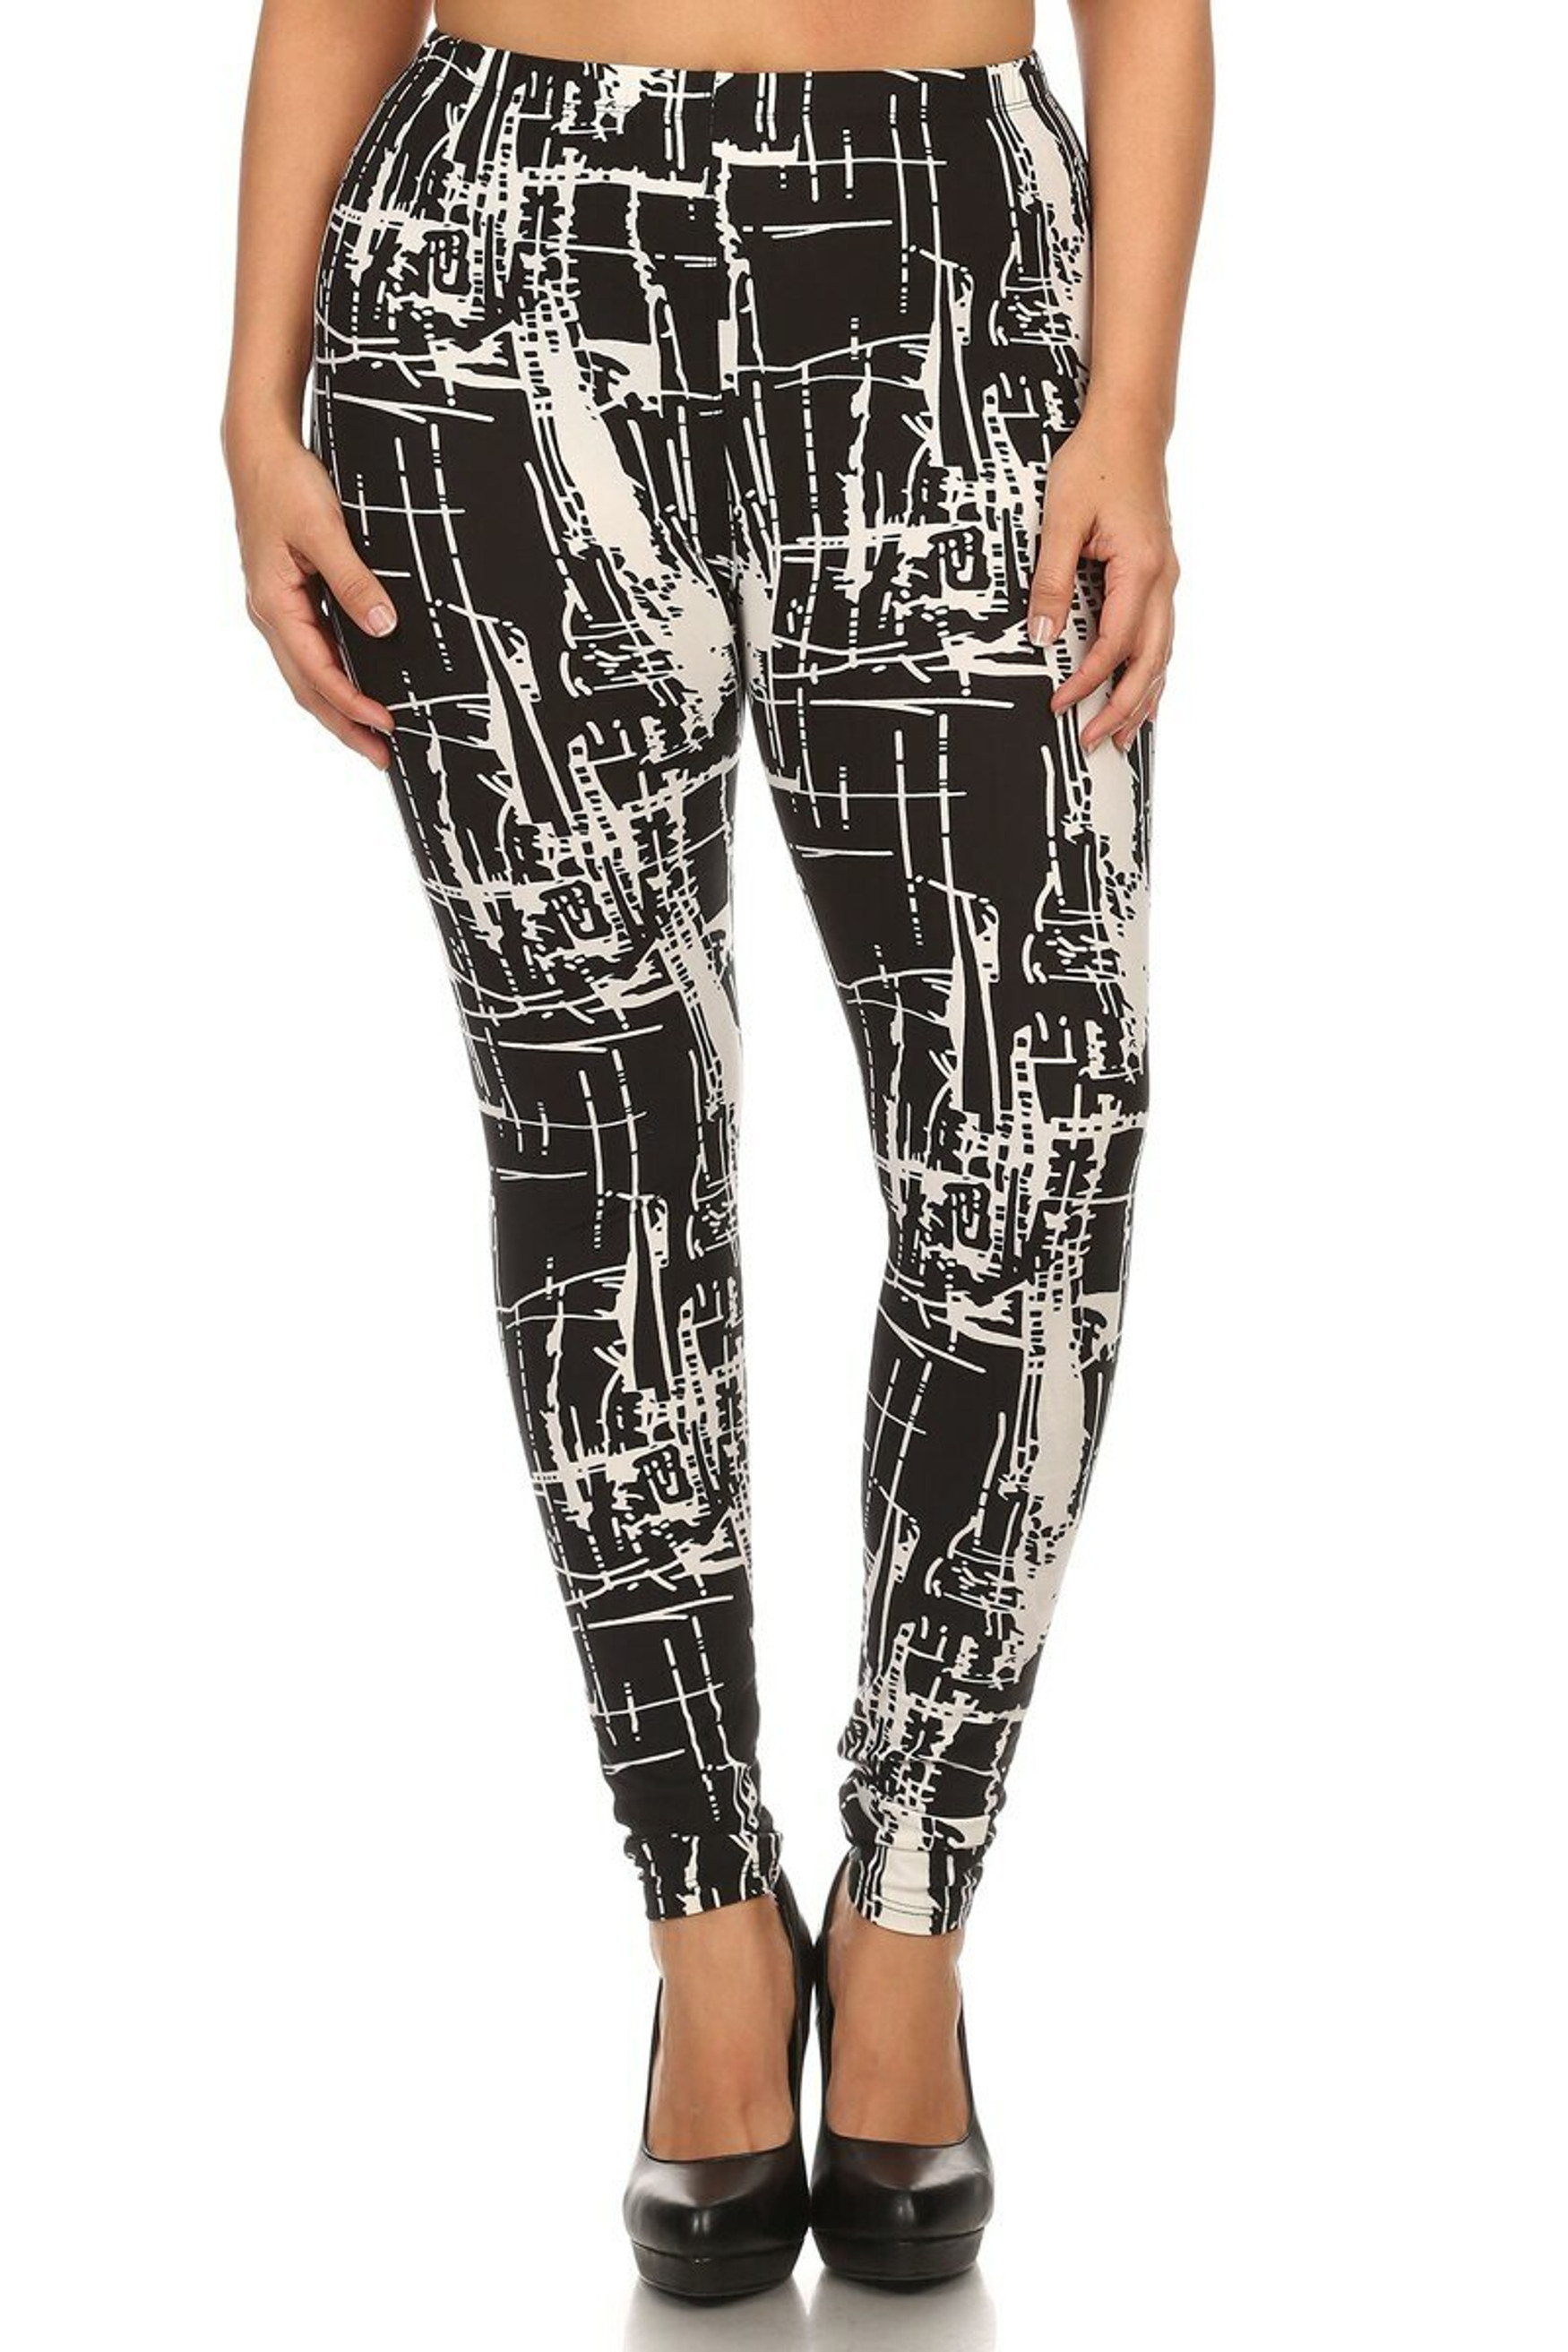 Buttery Smooth Splattered Lines Plus Size Leggings